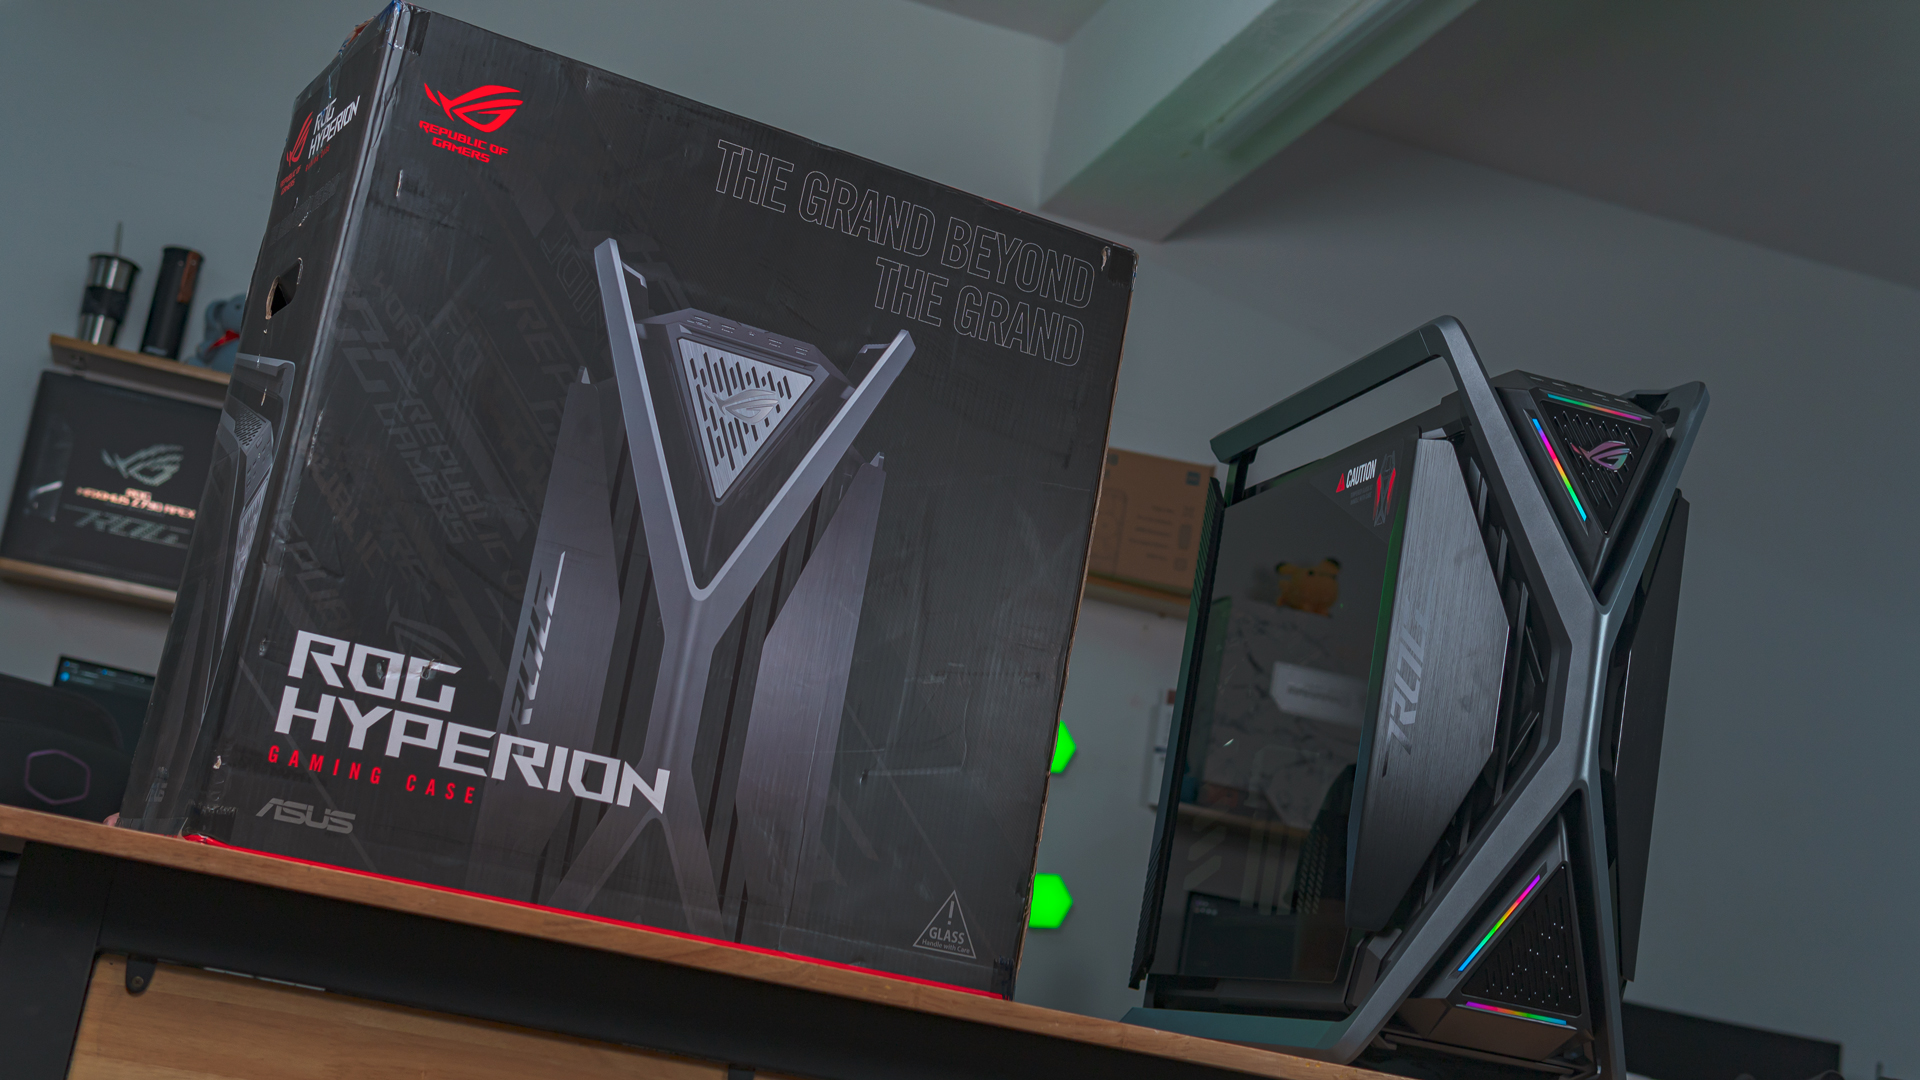 ASUS ROG Hyperion GR701 Review - X Marks The Spot! 